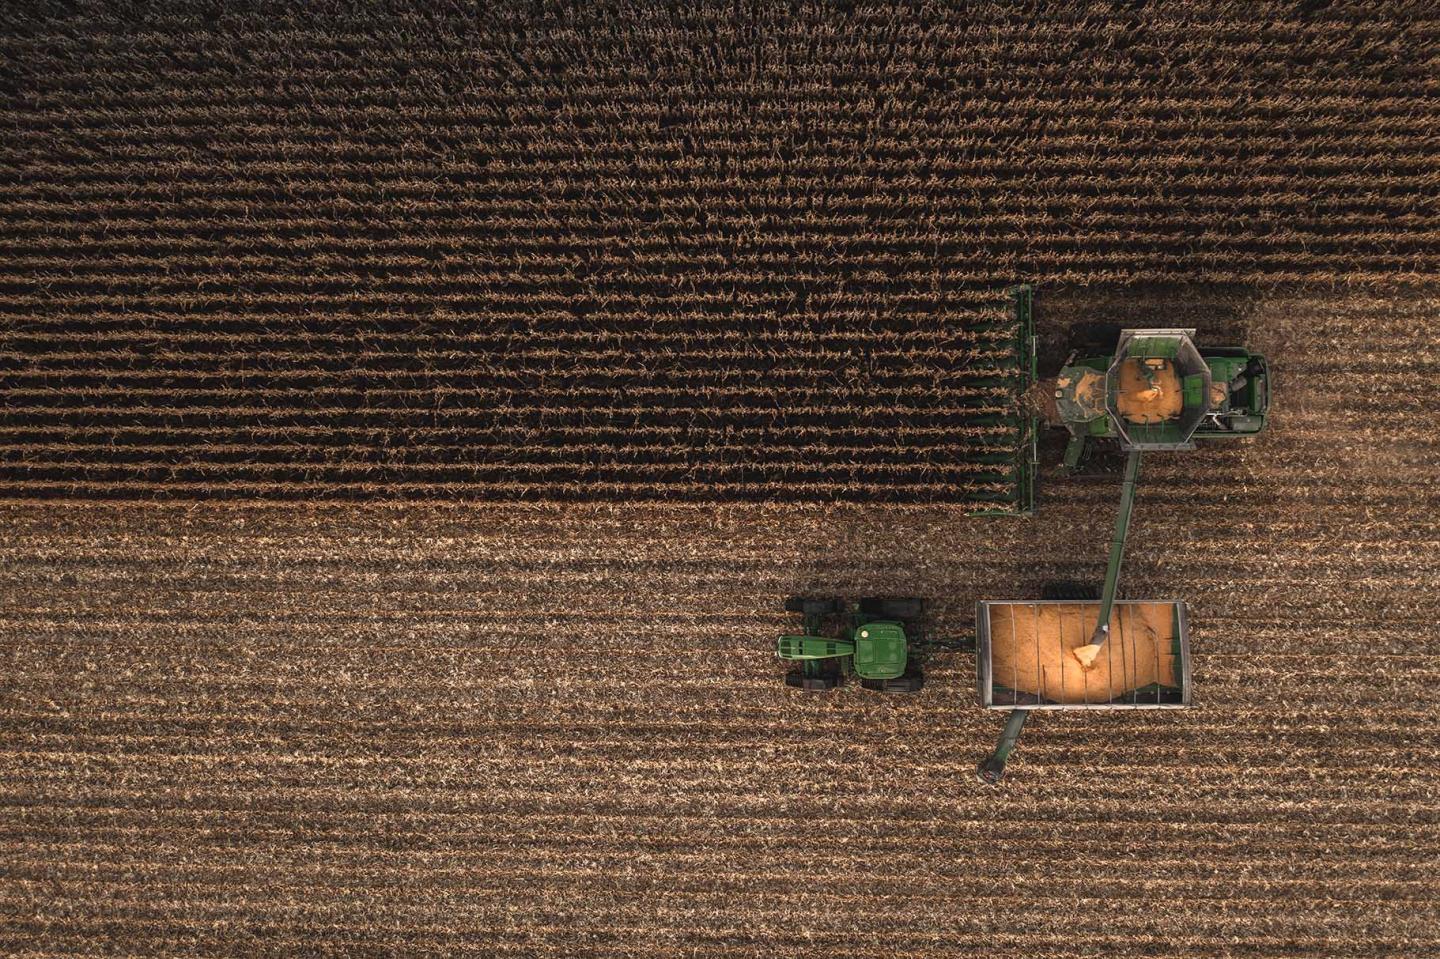 Shawn Feikema harvests corn on his 7,000-acre farm in Luverne, Minnesota. Feikema and his family switch to a mix of strip-tillage and no-tillage in 2016 to help build resilience into their farm and protect it from changing weather patterns. (Photo Courtesy of Andrew Bydlon) 